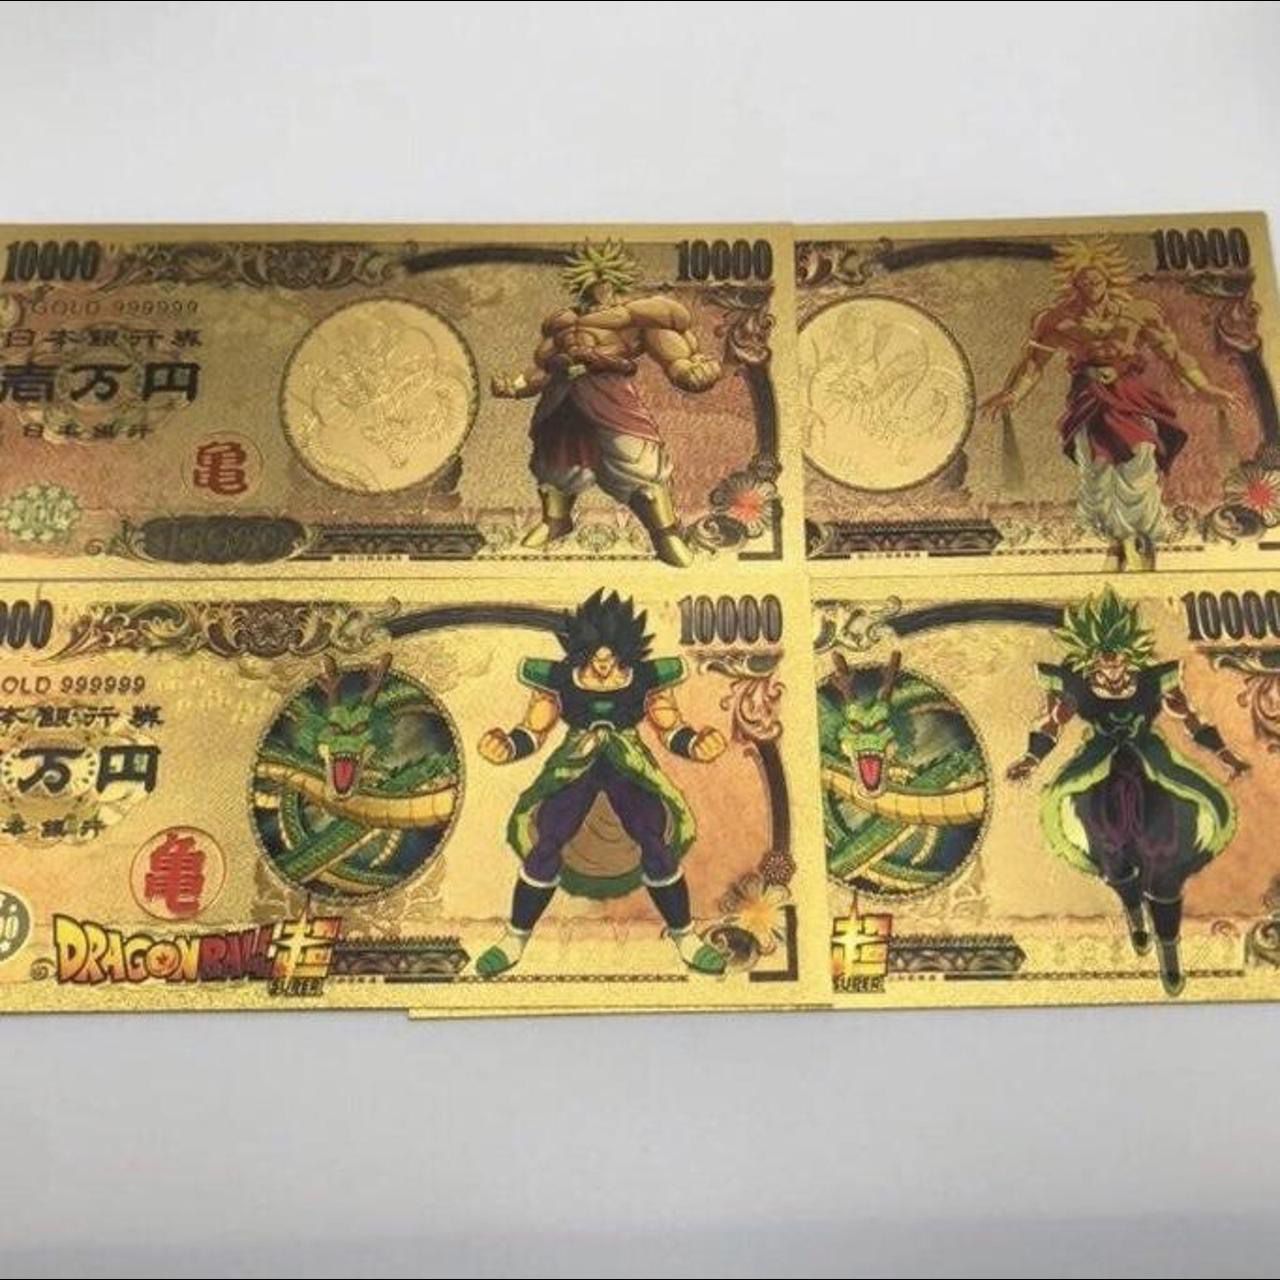 24k Gold Plated Broly (Dragon Ball Z) Banknote Set